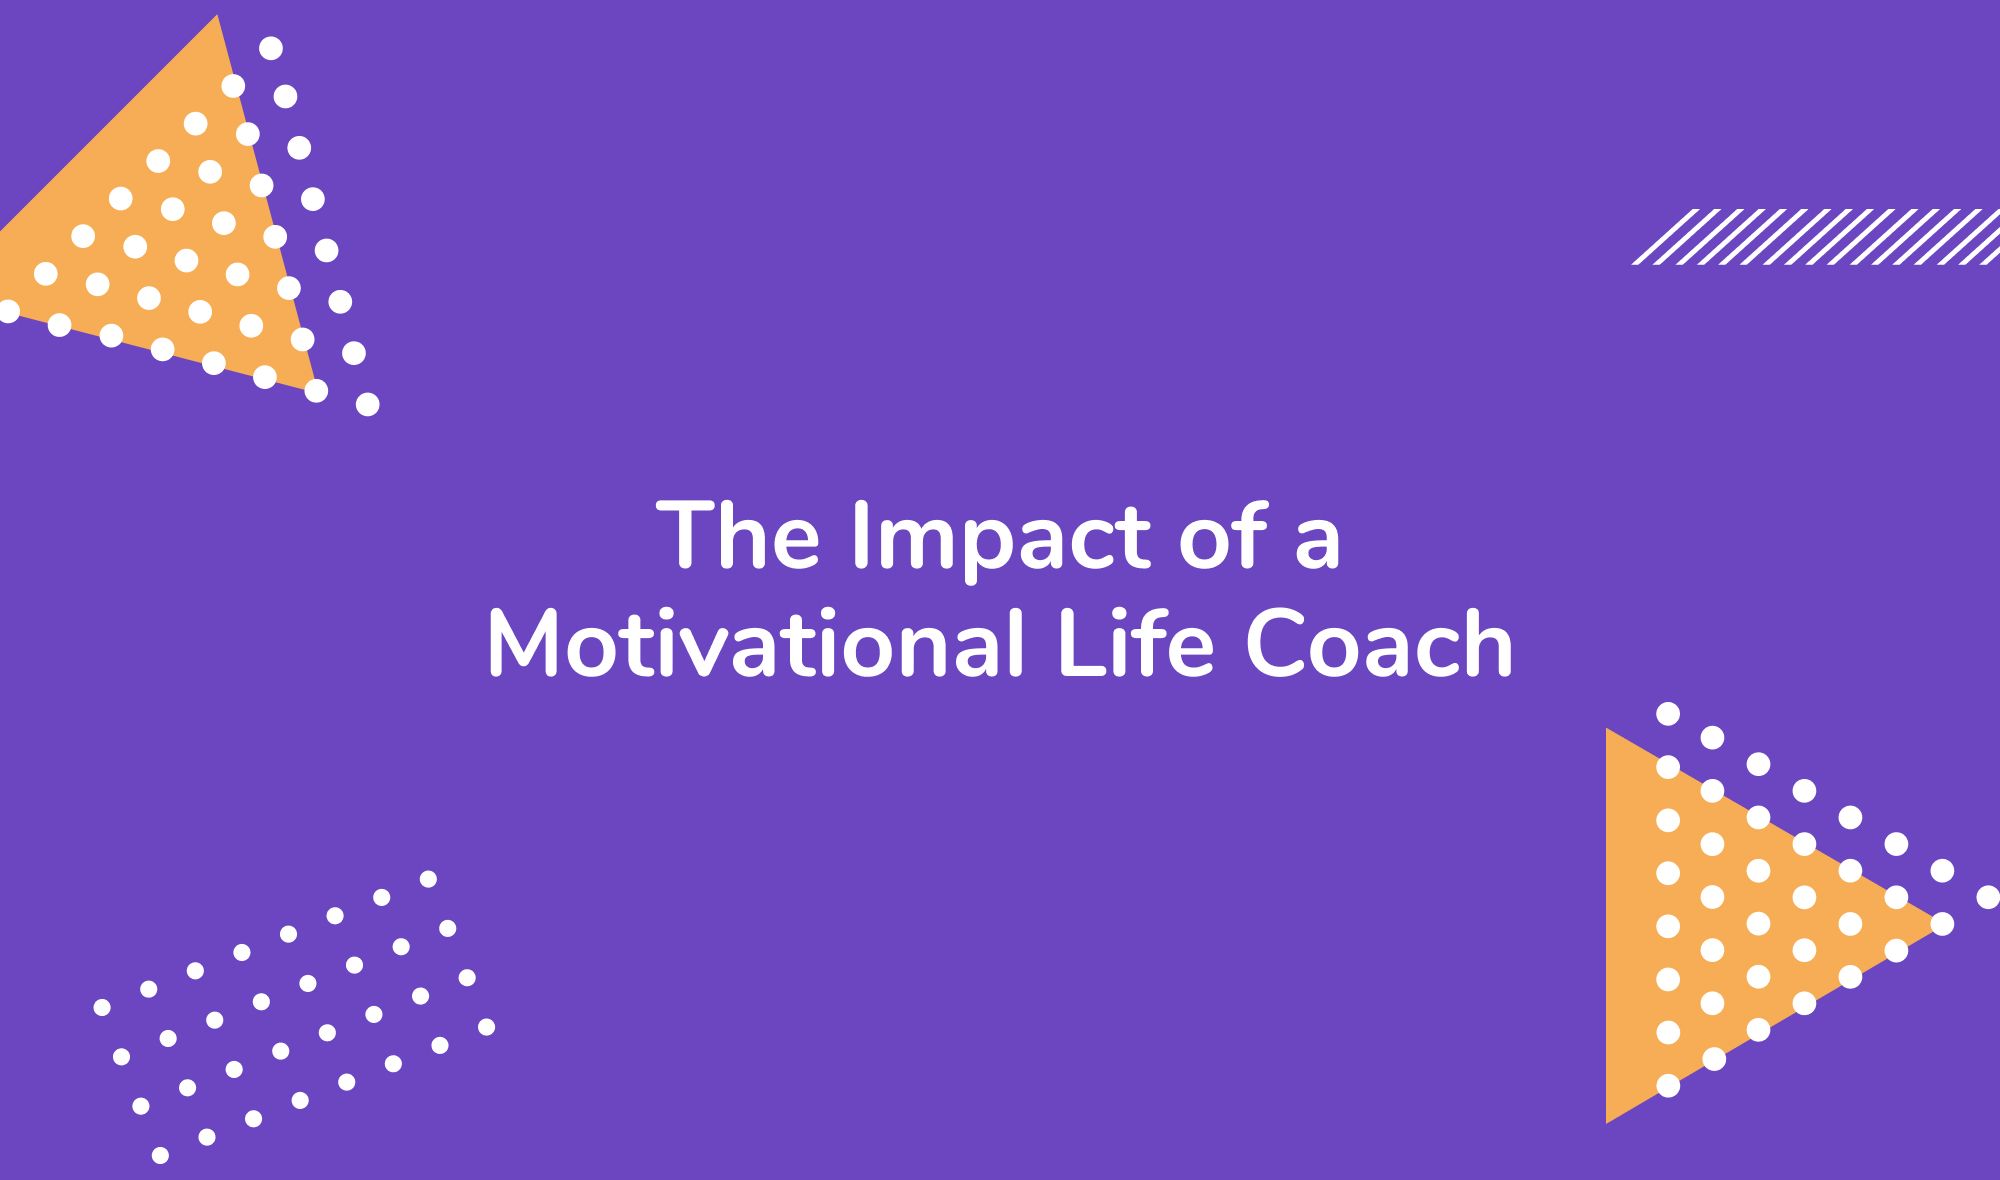 The Impact of a Motivational Life Coach